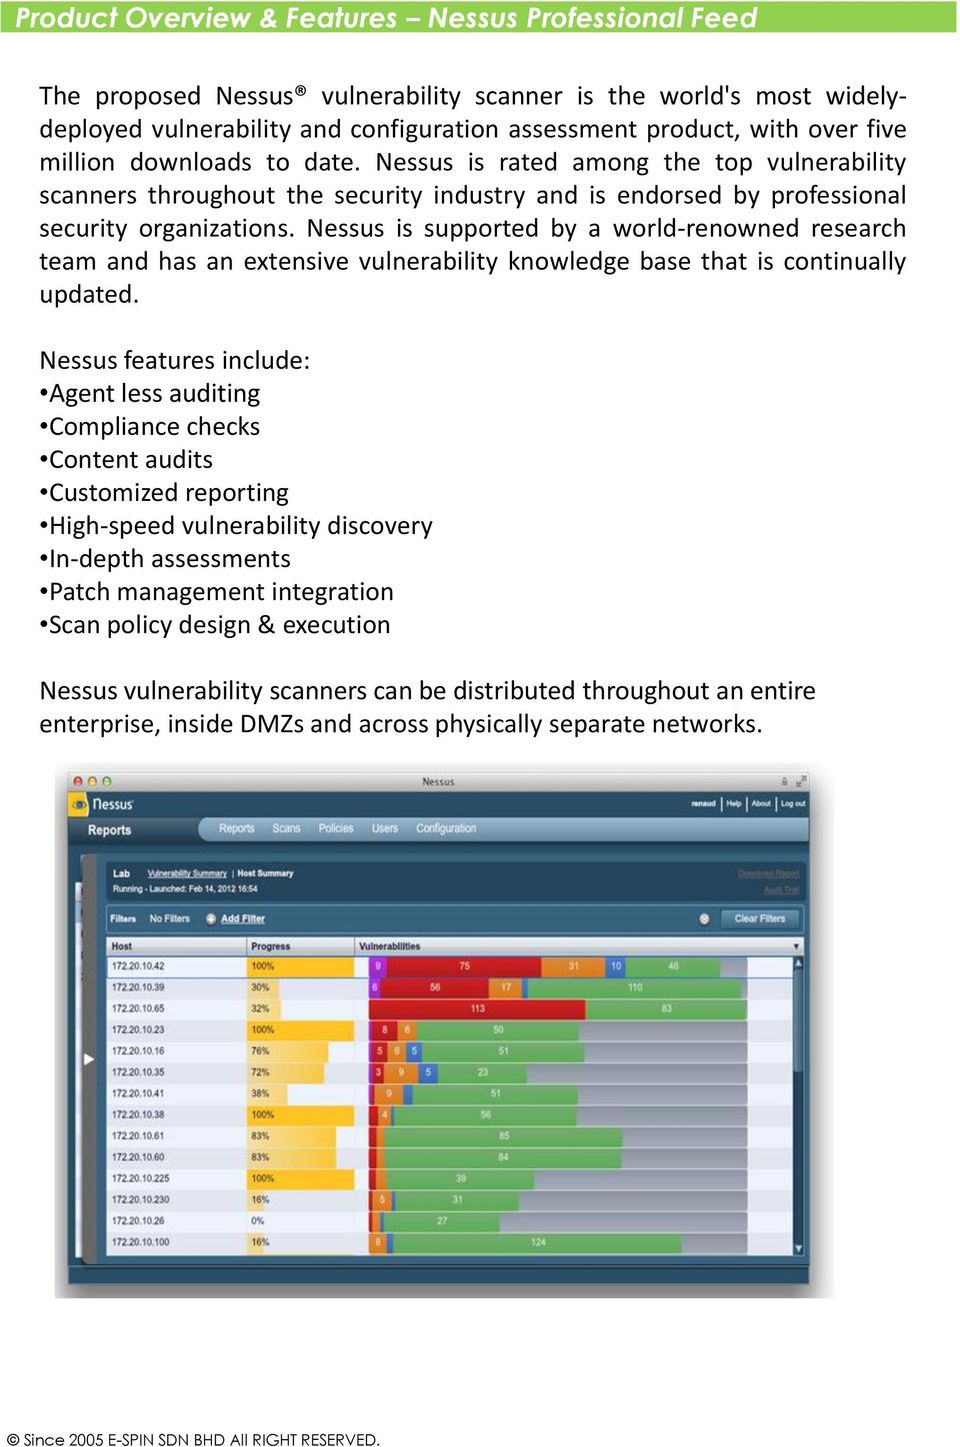 Nessus is supported by a world-renowned research team and has an extensive vulnerability knowledge base that is continually updated.